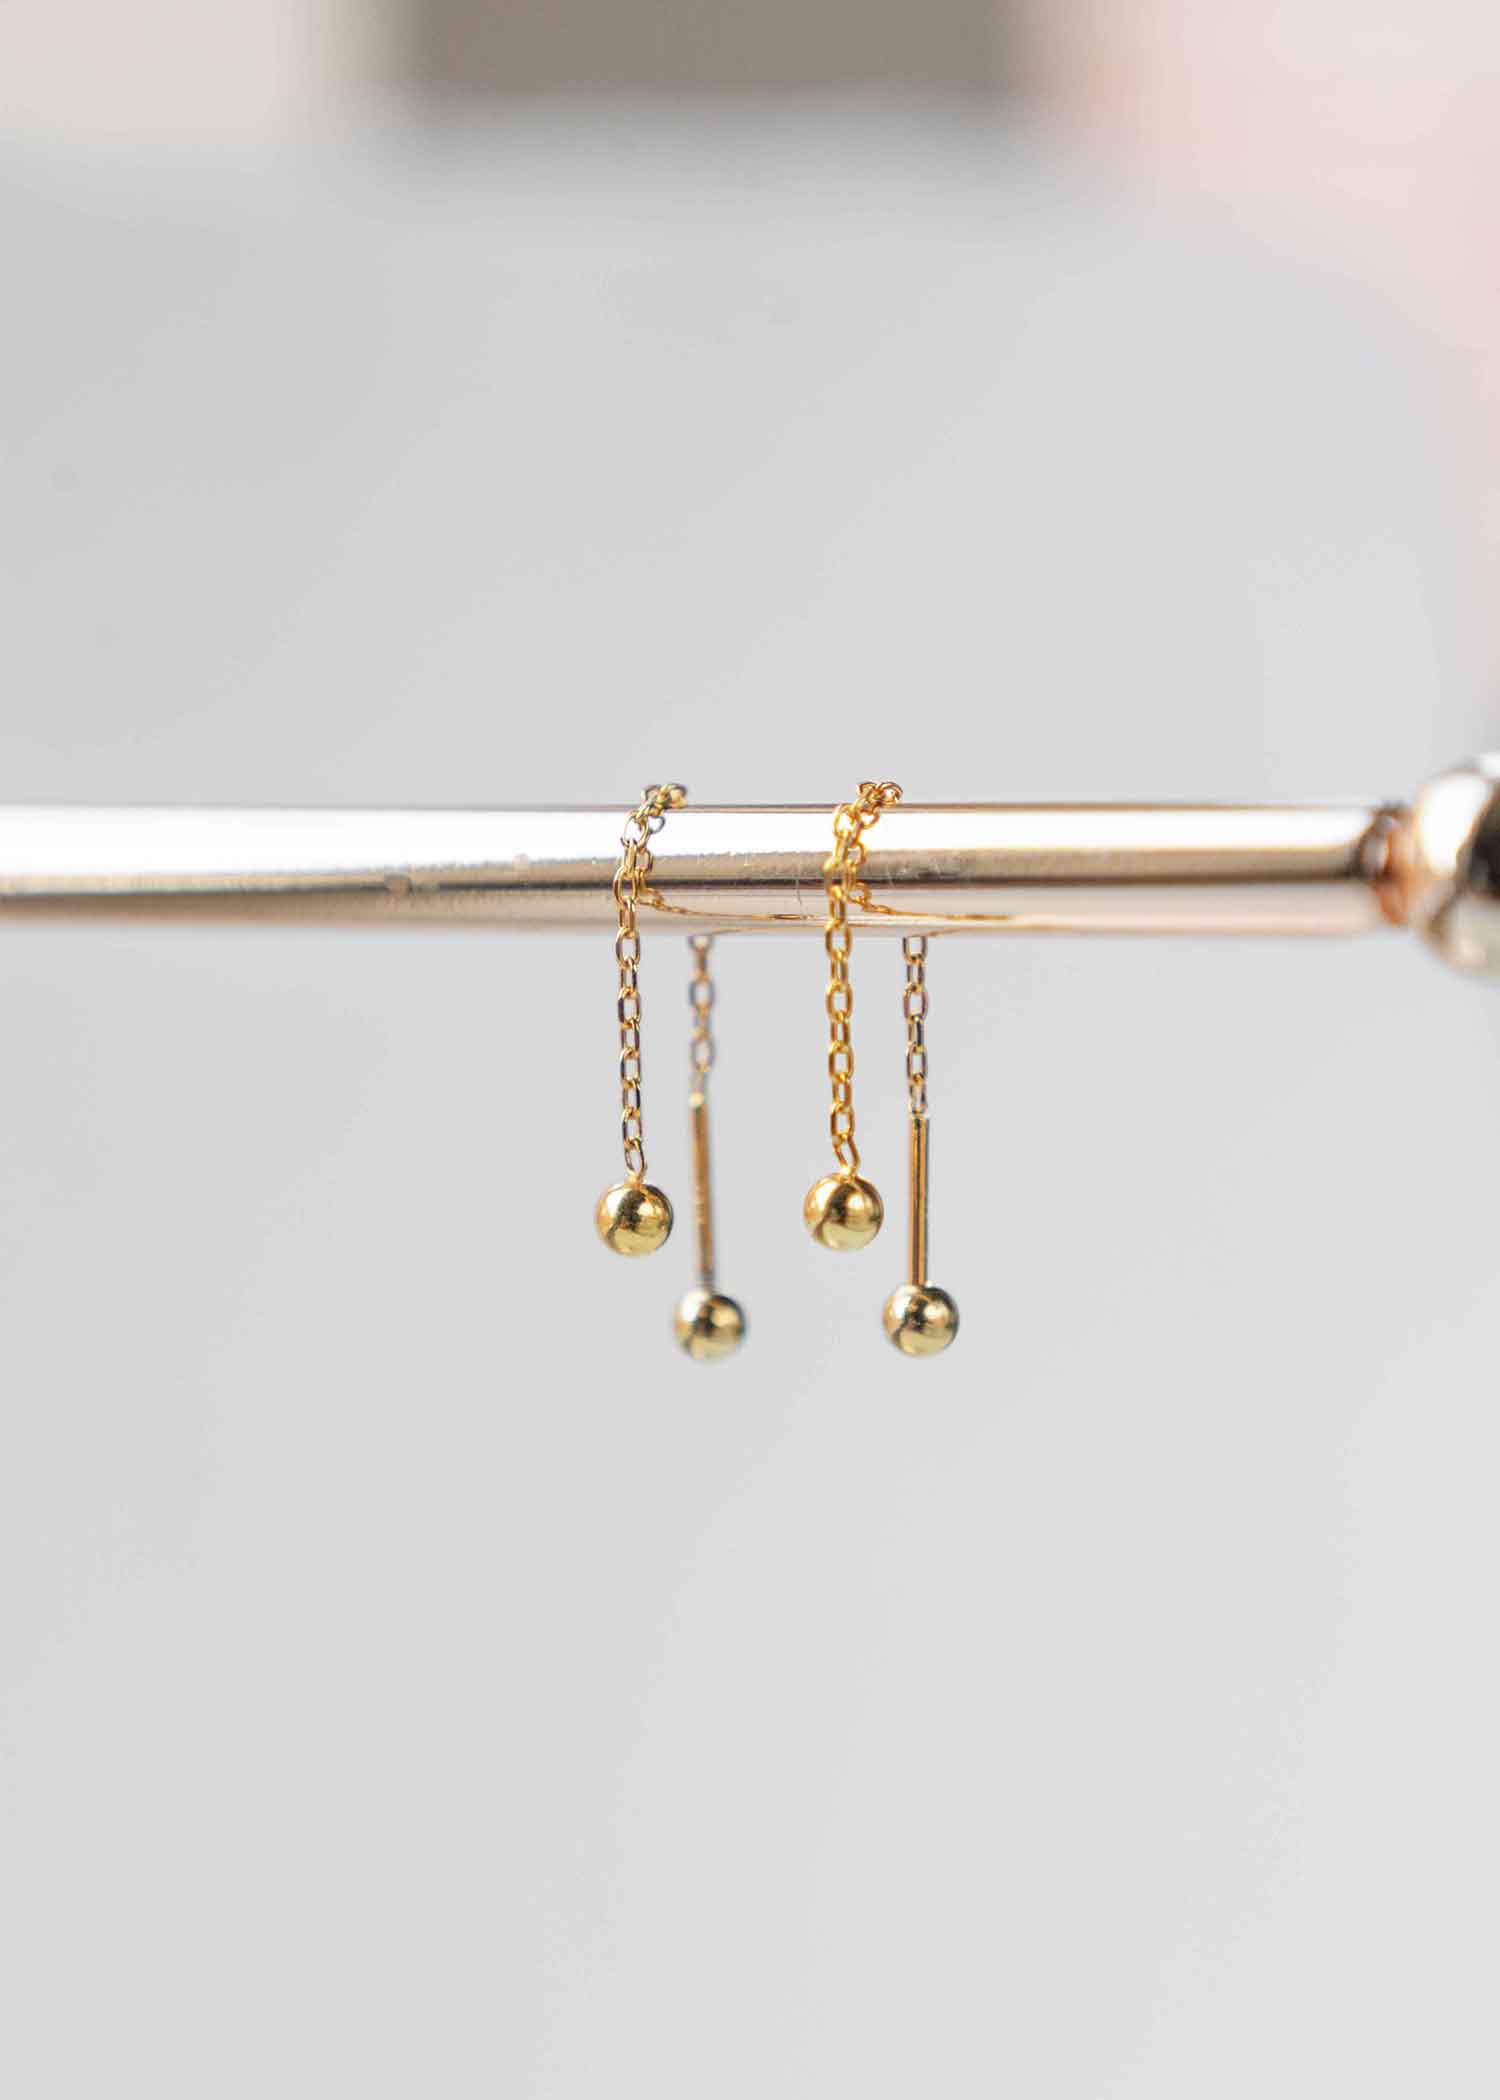 Front and Back Essential Threaders for Everday Earrings Gold Lightweight Sleeper Live In Earrings Sterling Silver Threader earrings to wear in the shower and sleep in gifts for girls